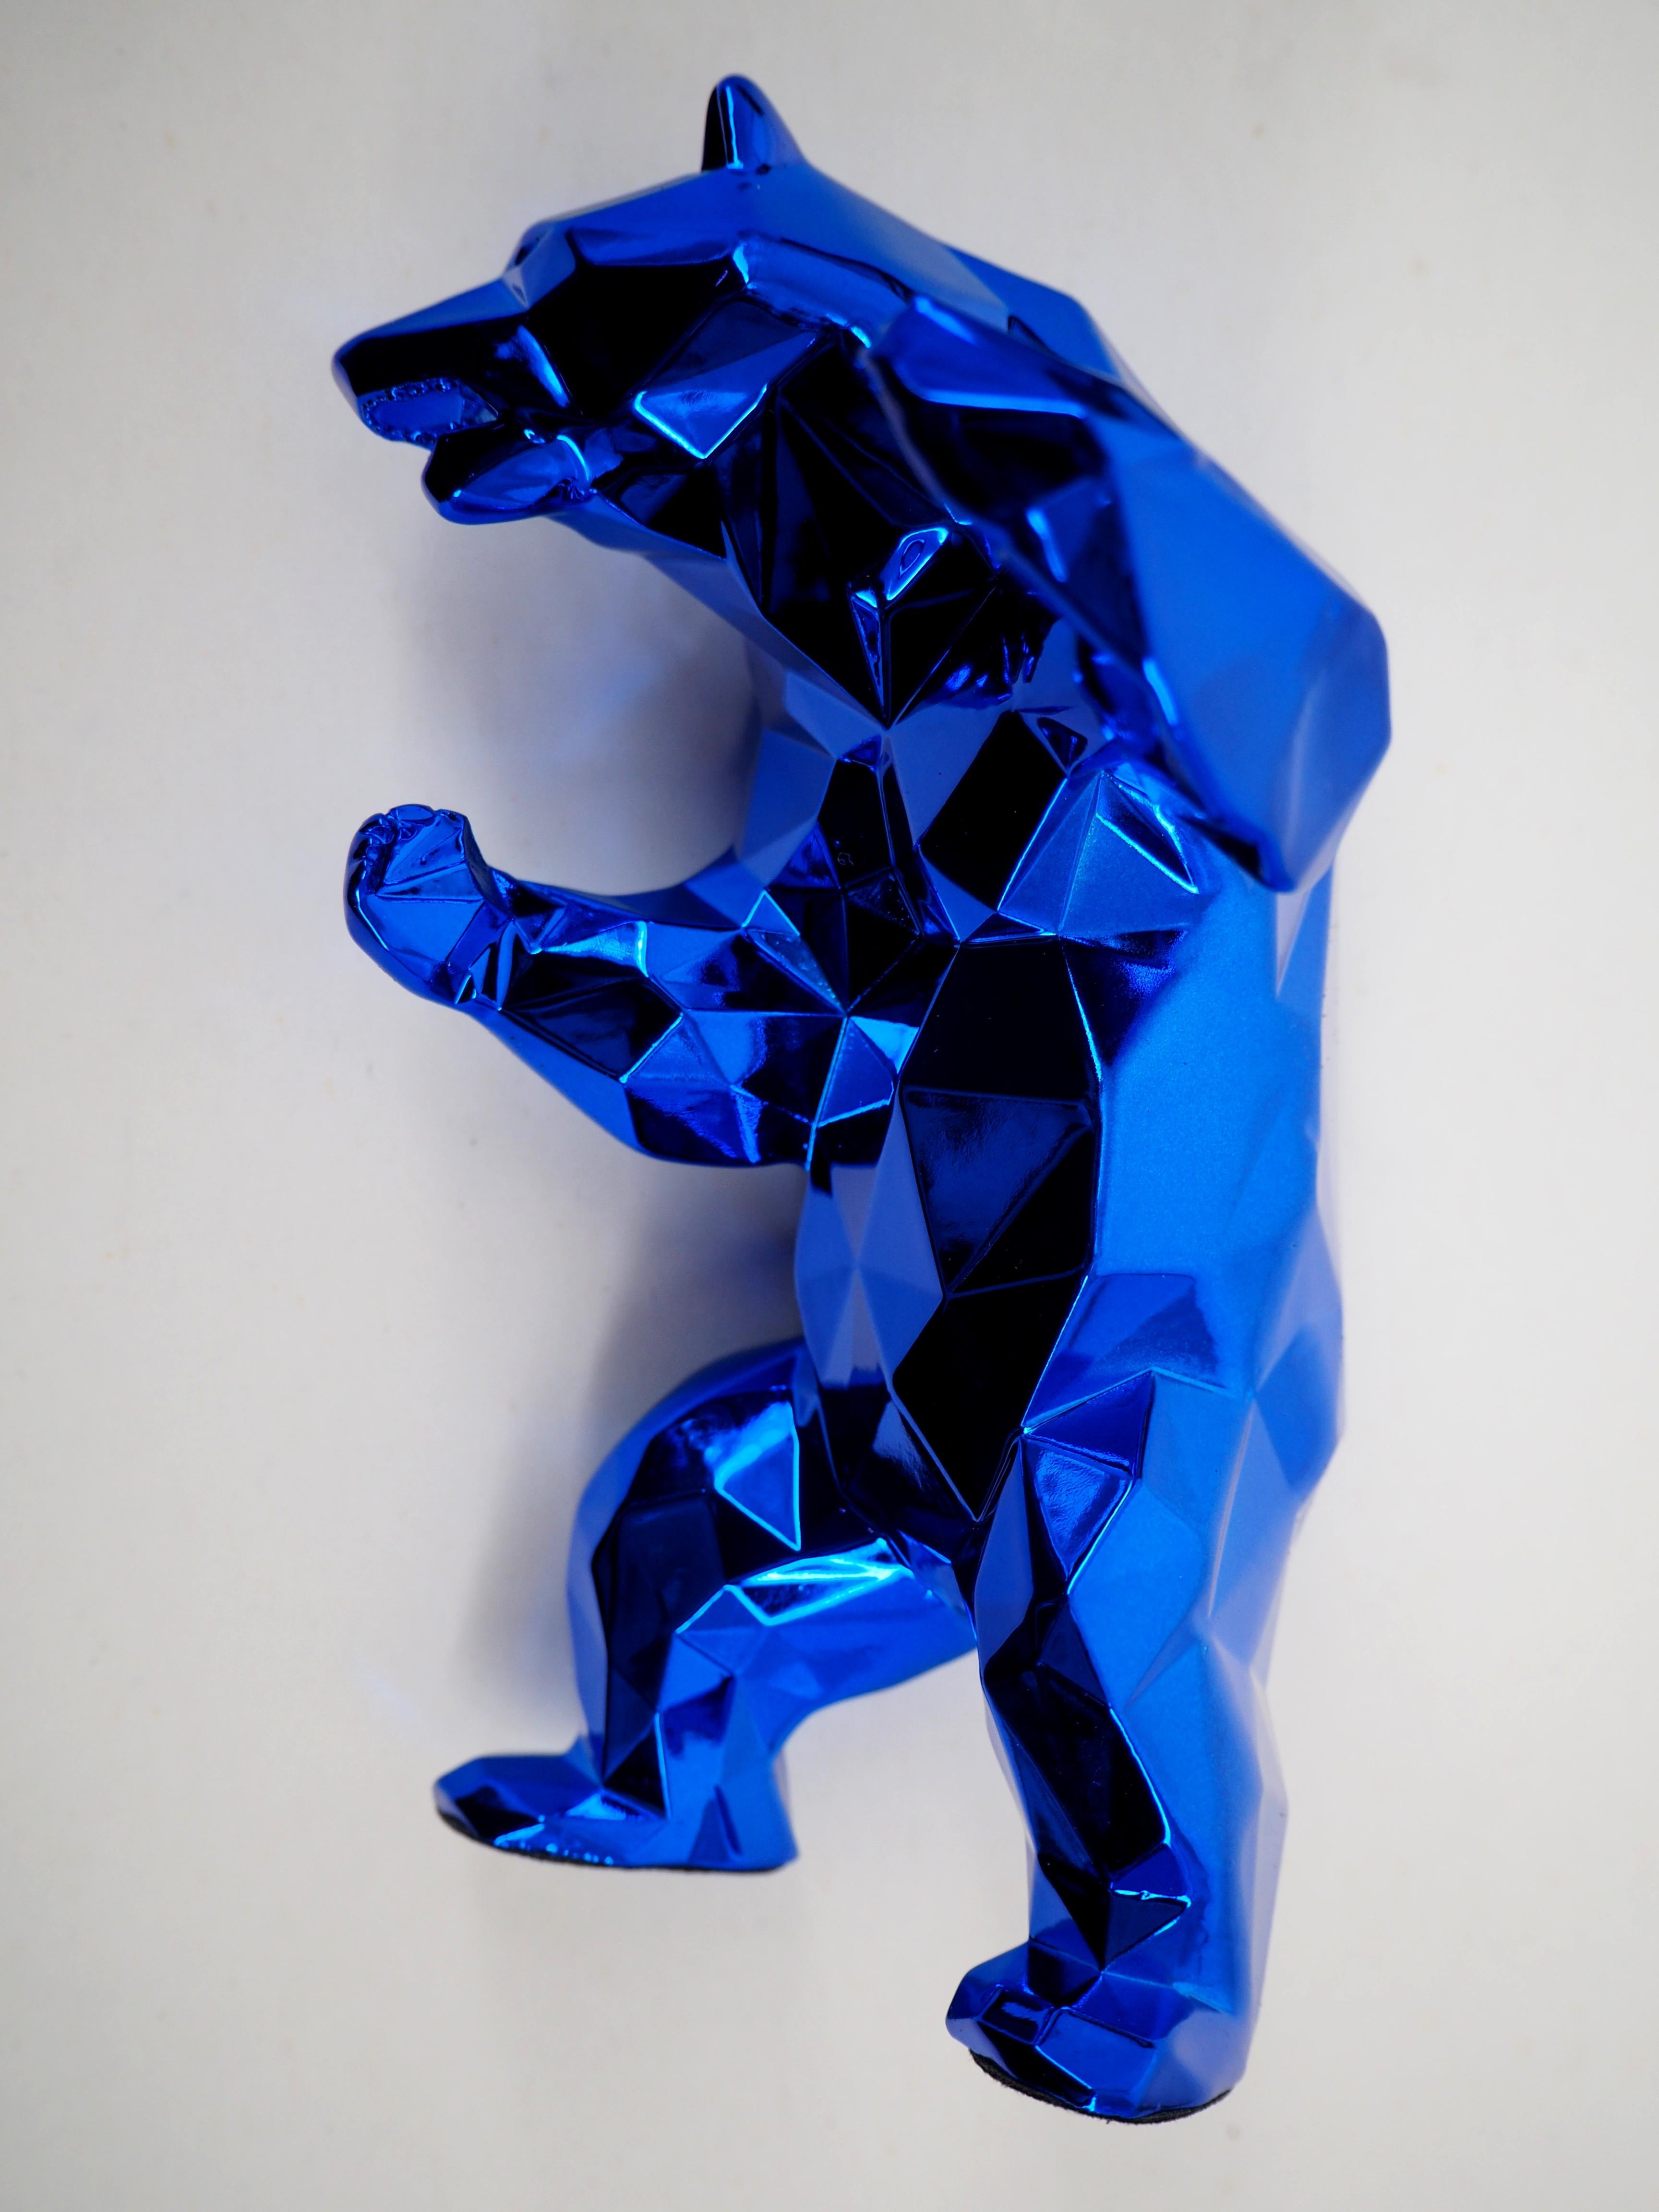 Richard ORLINSKI
StandingBear (Blue)

Sculpture in resin
Metallic Blue
About 13.5 x 8 cm (c. 5.5 x 3.5 in)
Presented in original box with certificate

Excellent condition